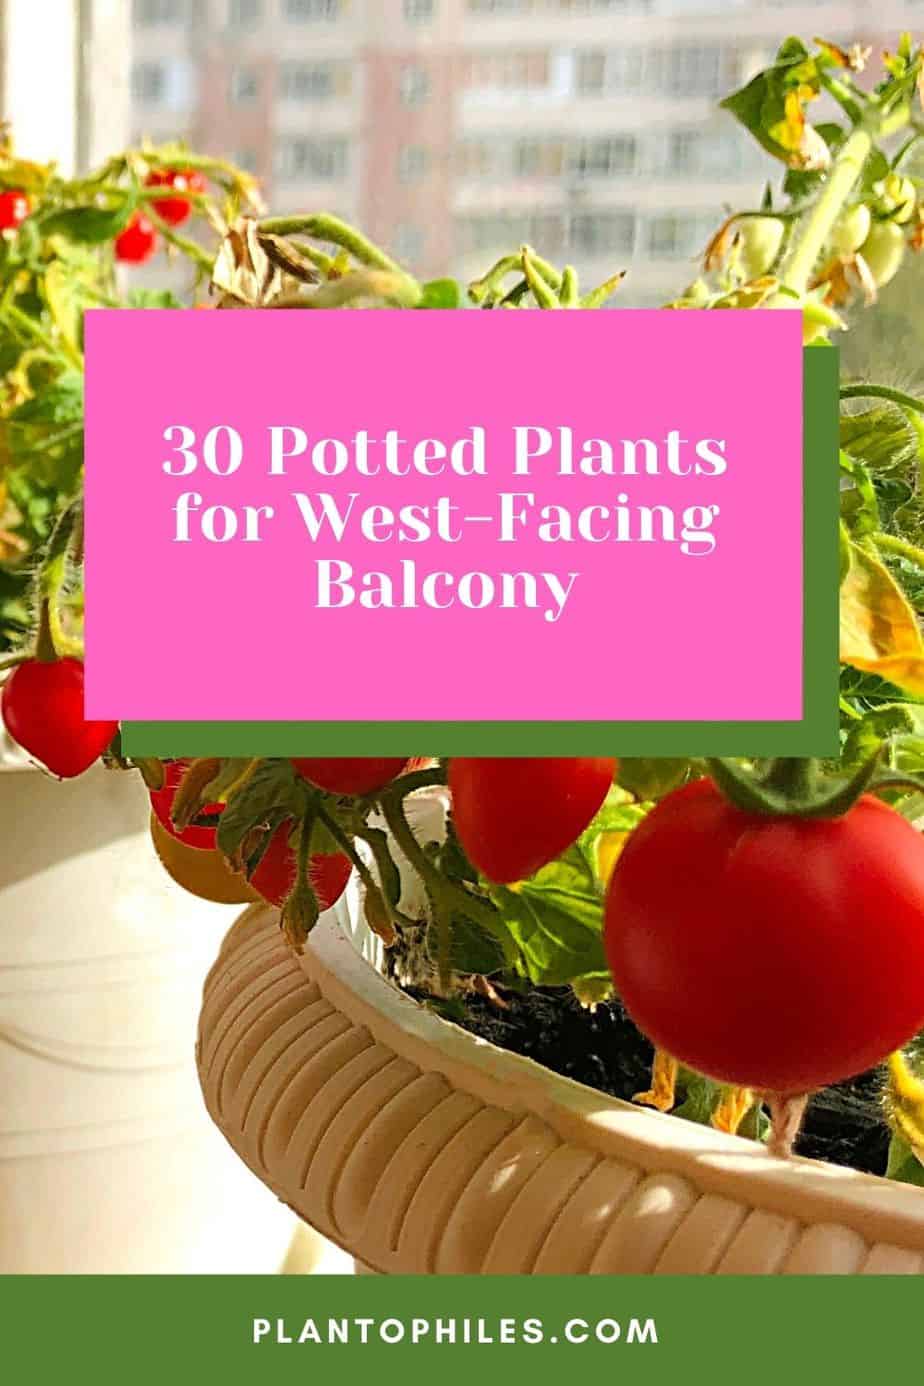 30 Potted Plants for West Facing Balcony